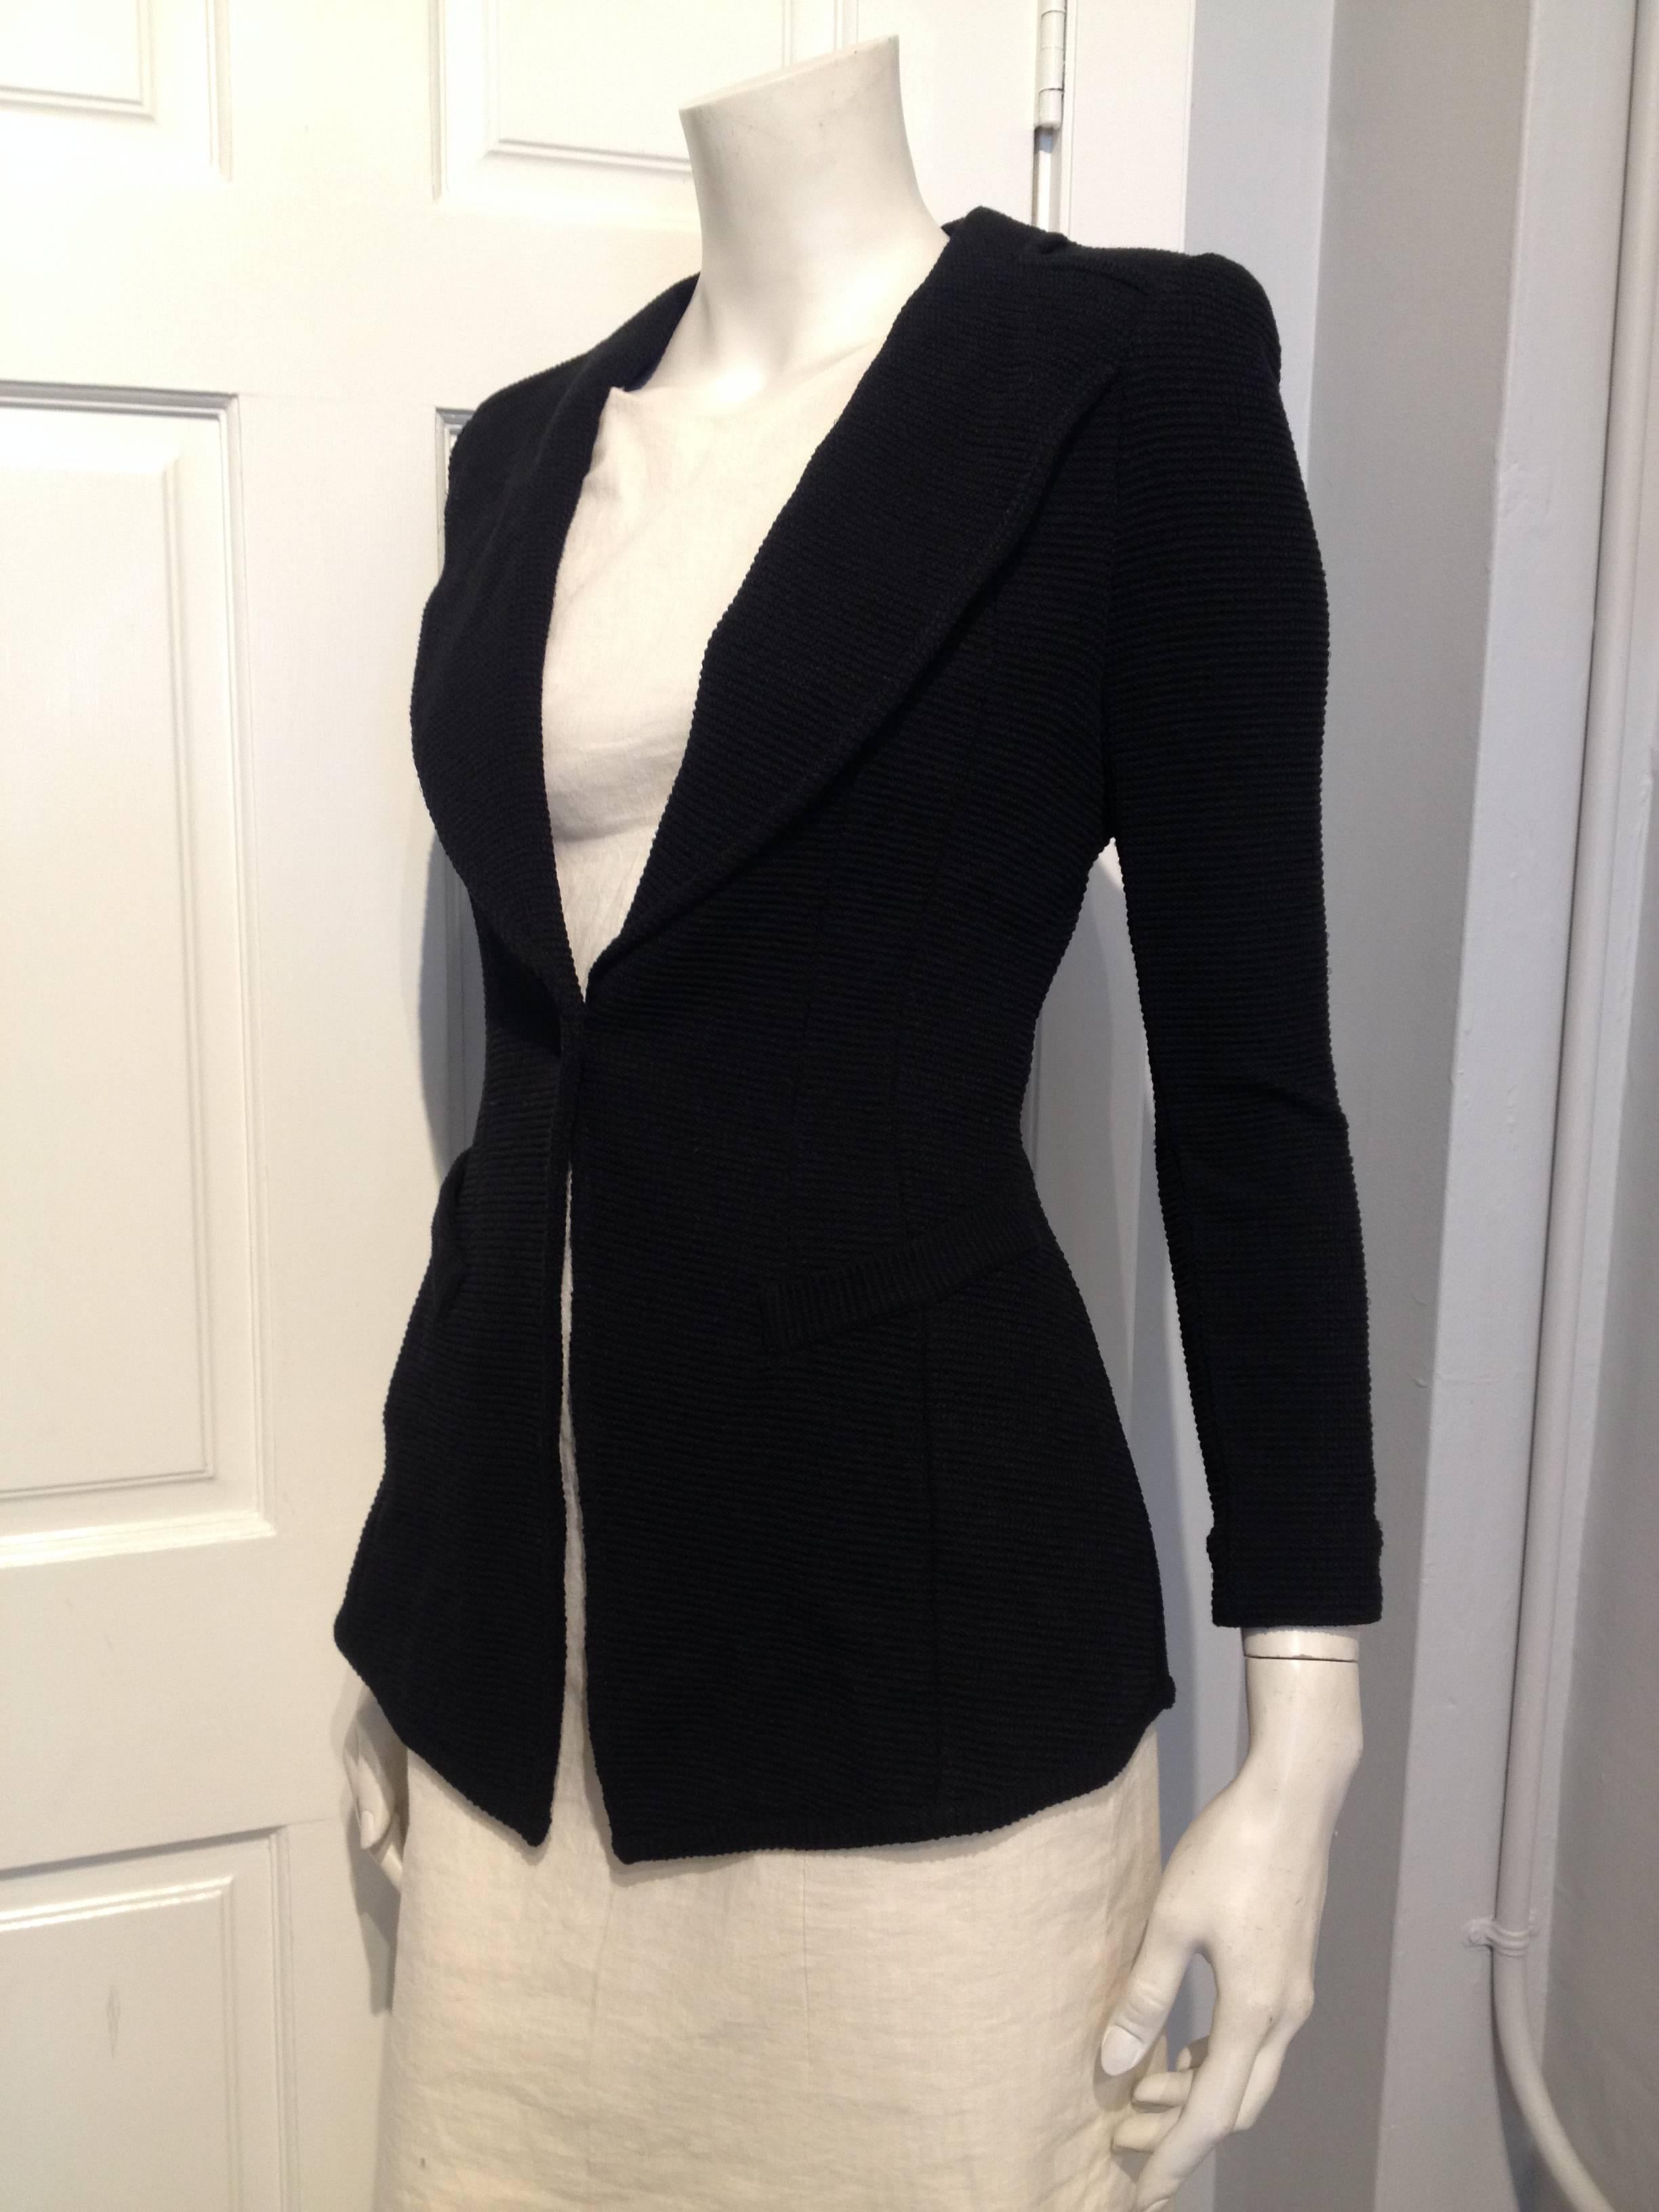 Black knit blazer with lapels connected to the jacket at the padded shoulders, very slim cut, long sleeves, single button closure, and open vent in the back.